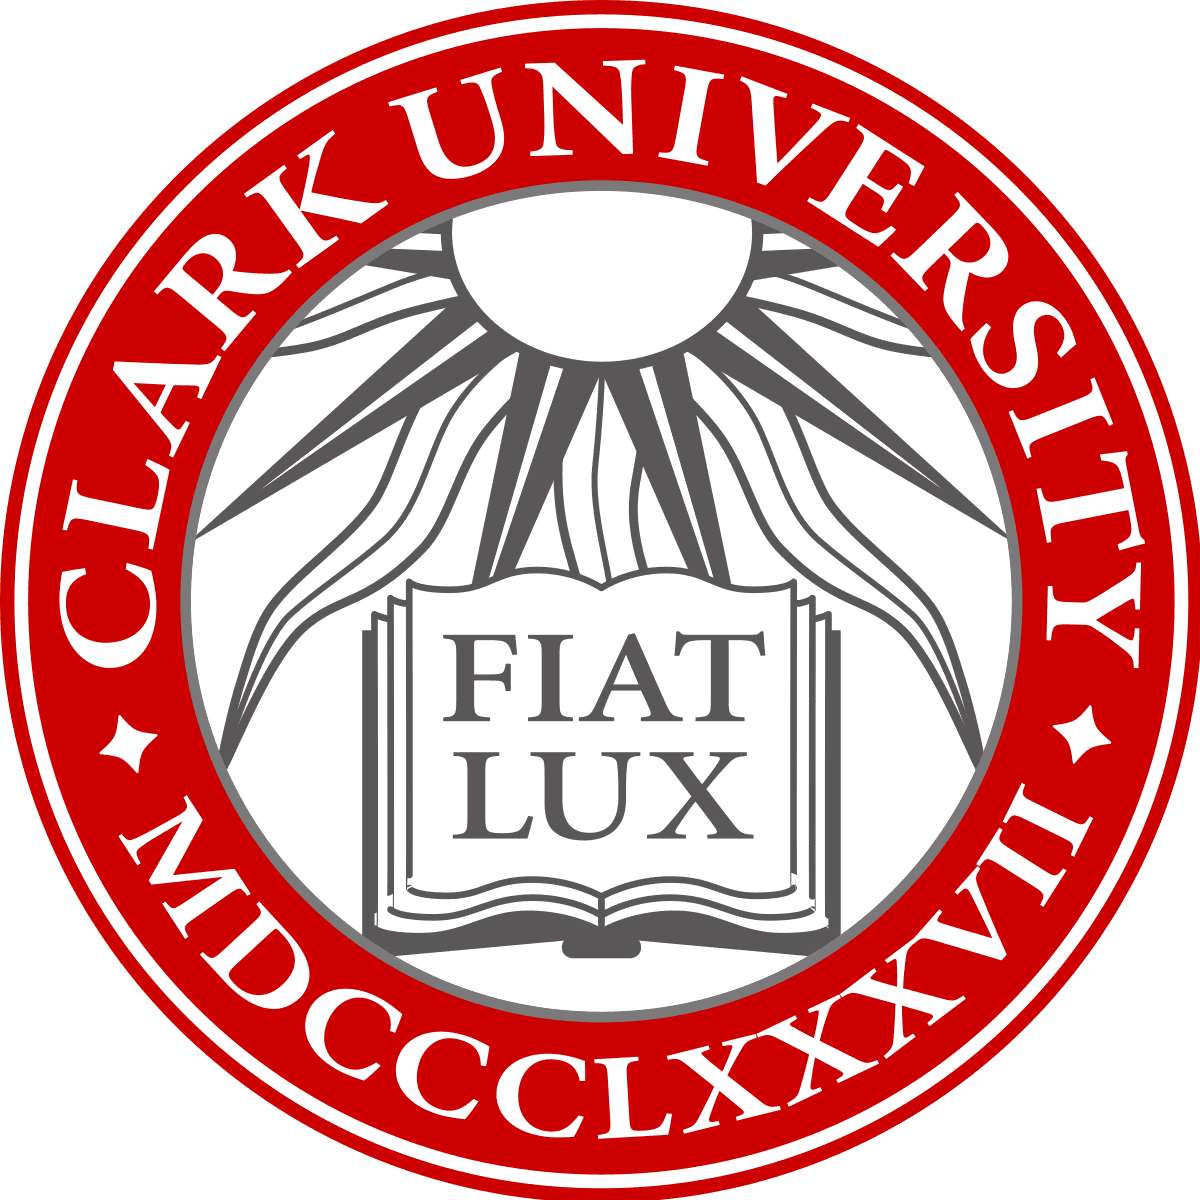 clark-sued-again-for-its-handling-of-sexual-misconduct-allegations